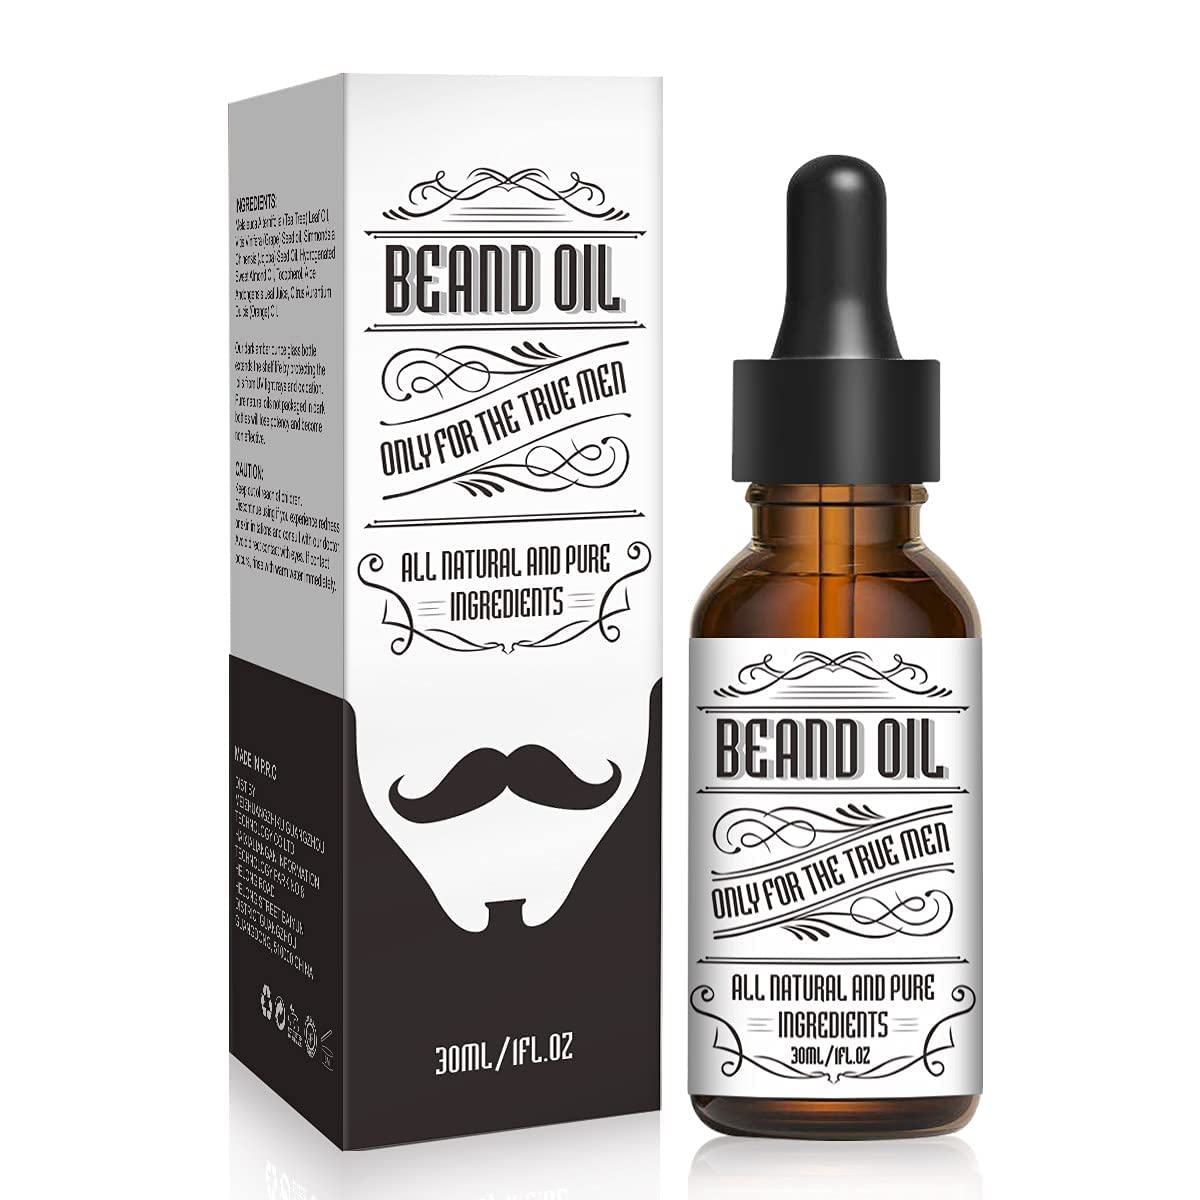 Beard Oil, Beard Oil For Men Growth, Make The Beard More Full, Thick And Smooth, Moisture To Reduce Frizz, All/Pure Natural Organic Plant Extraction, 1FL.OZ (Charming Sports)